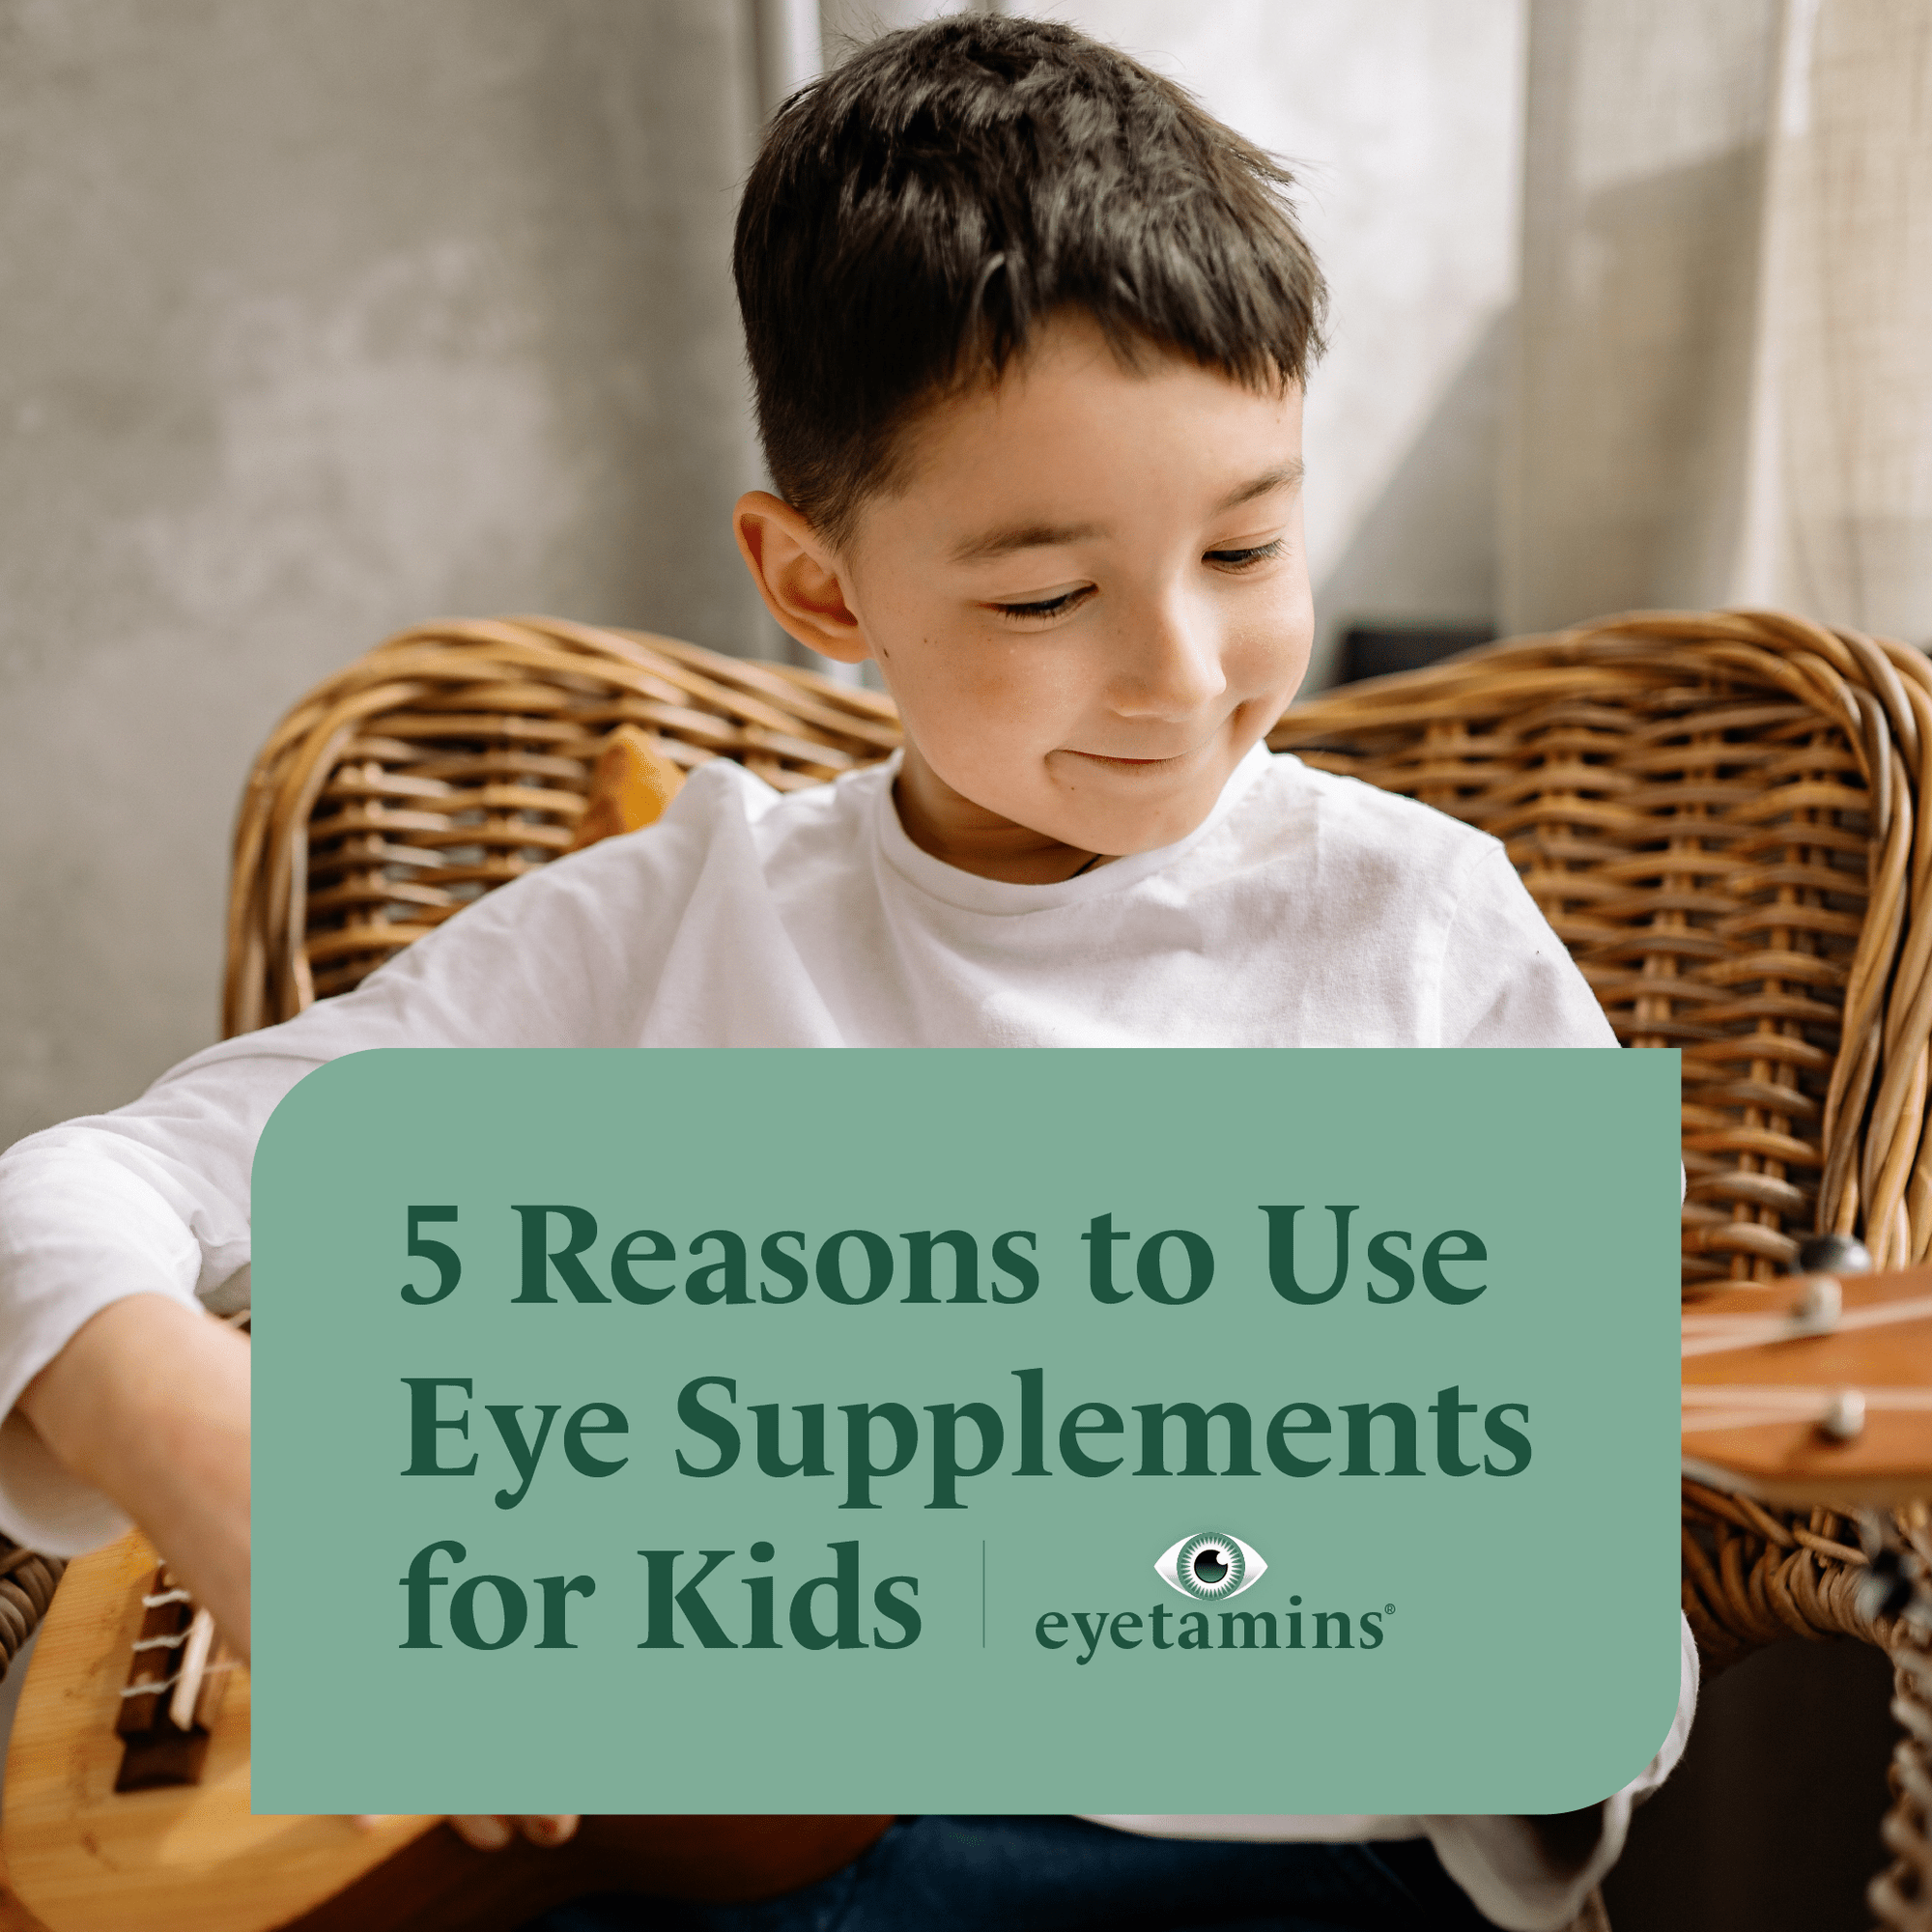 Eyetamins - 5 Reasons to Use Eye Supplements for Kids